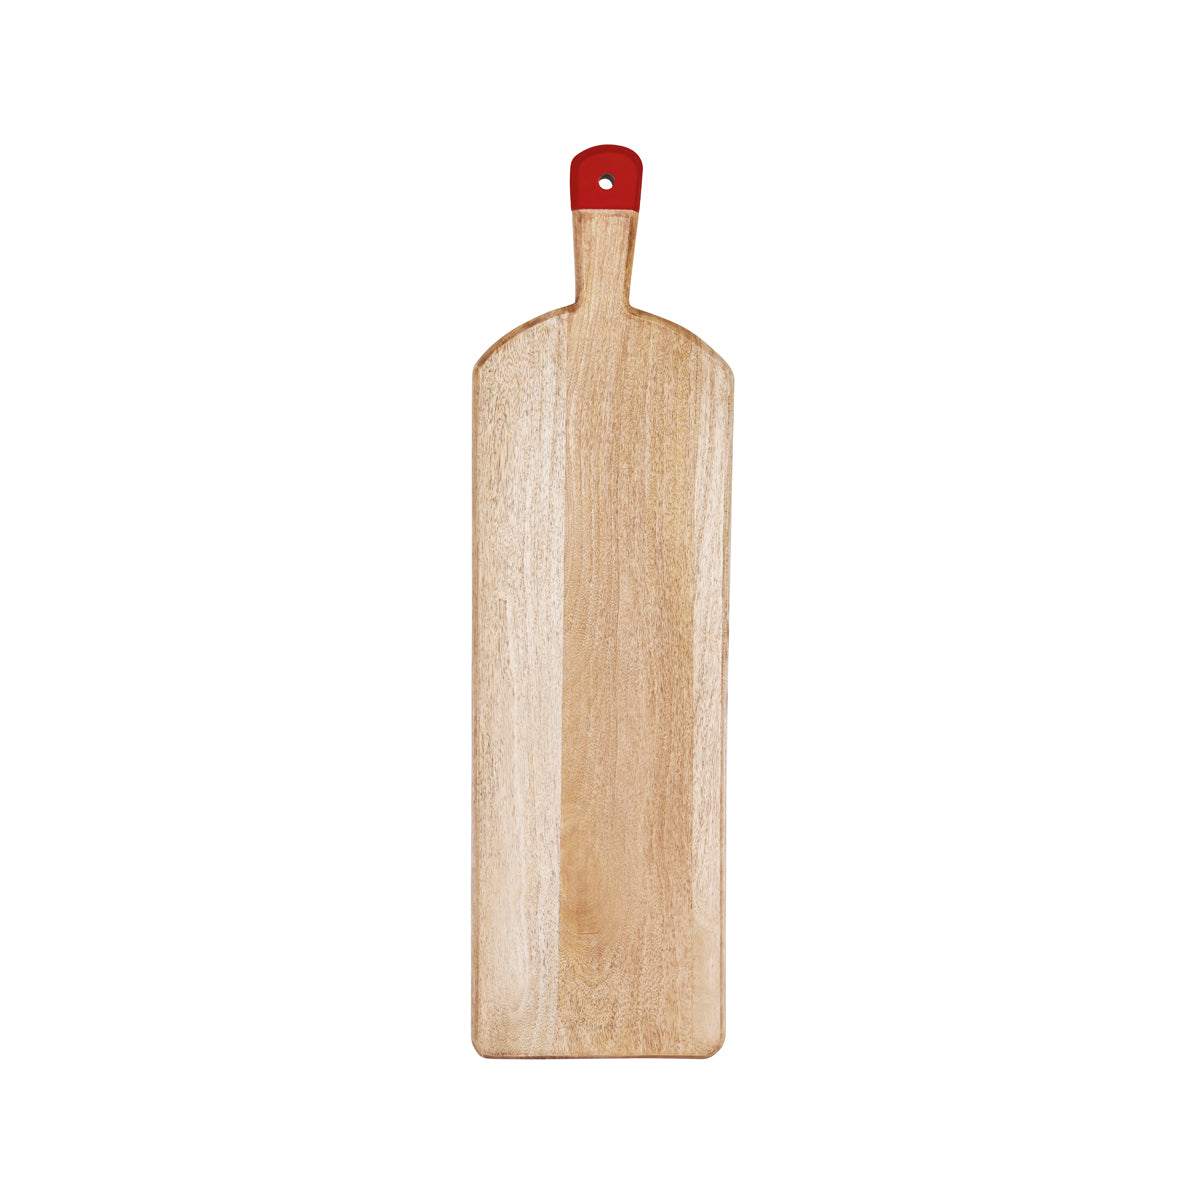 04998 Chef Inox Serve Mangowood Rectangular Serving Board with Red Handle 700x200x40mm Tomkin Australia Hospitality Supplies